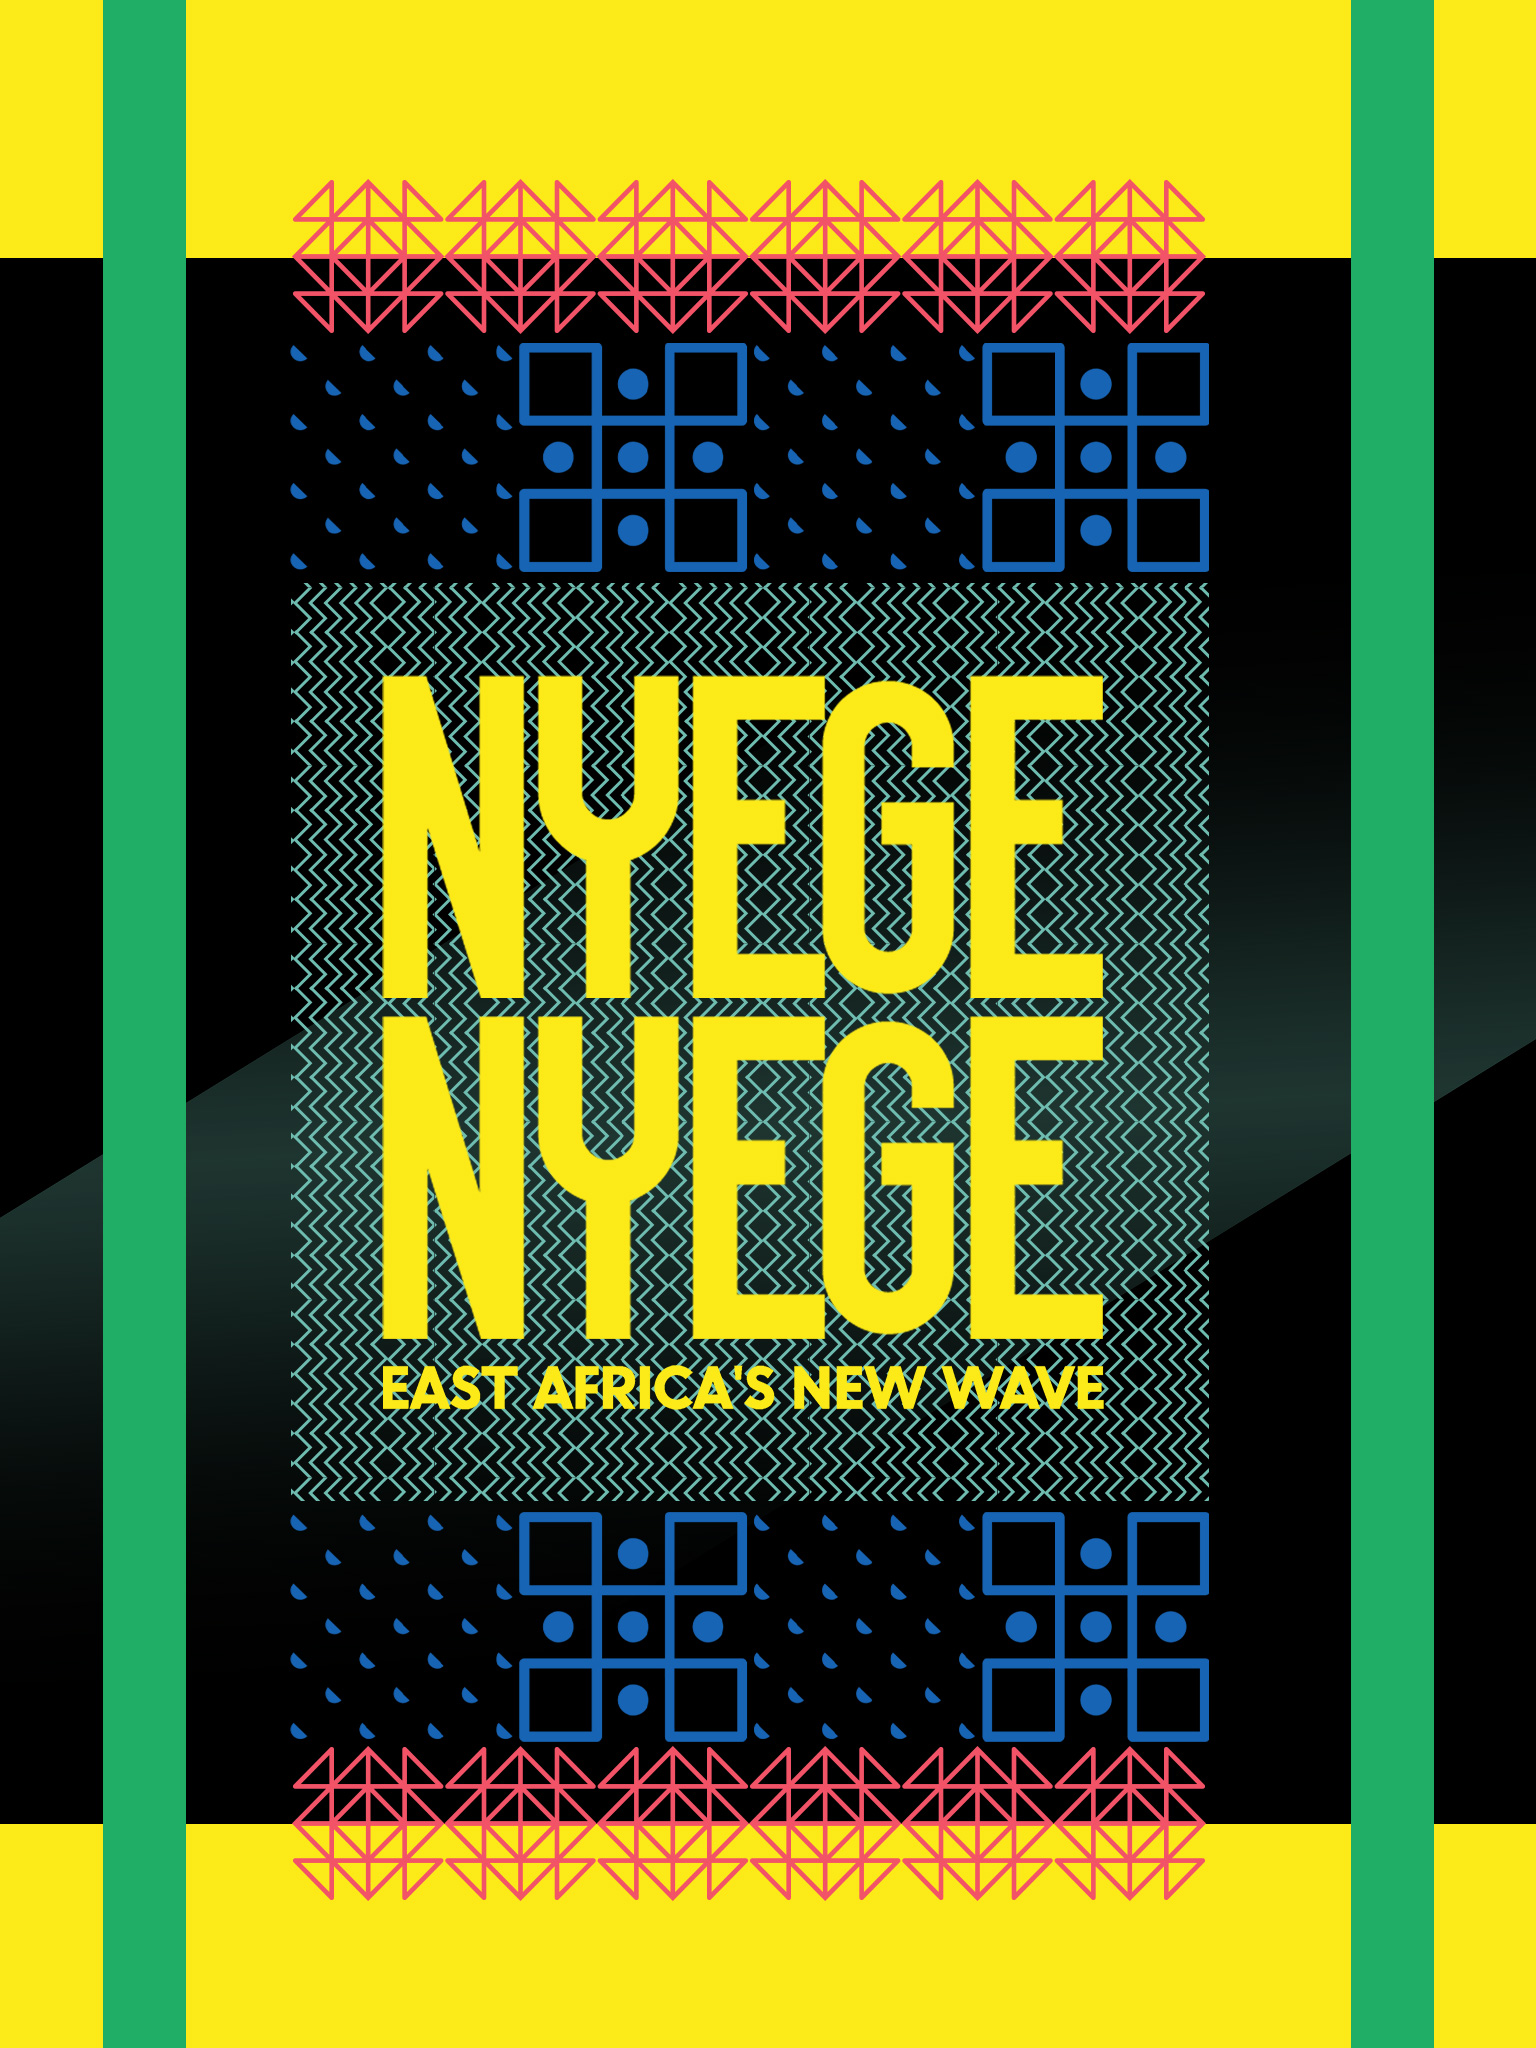 Nyege Nyege: East Africa's new wave